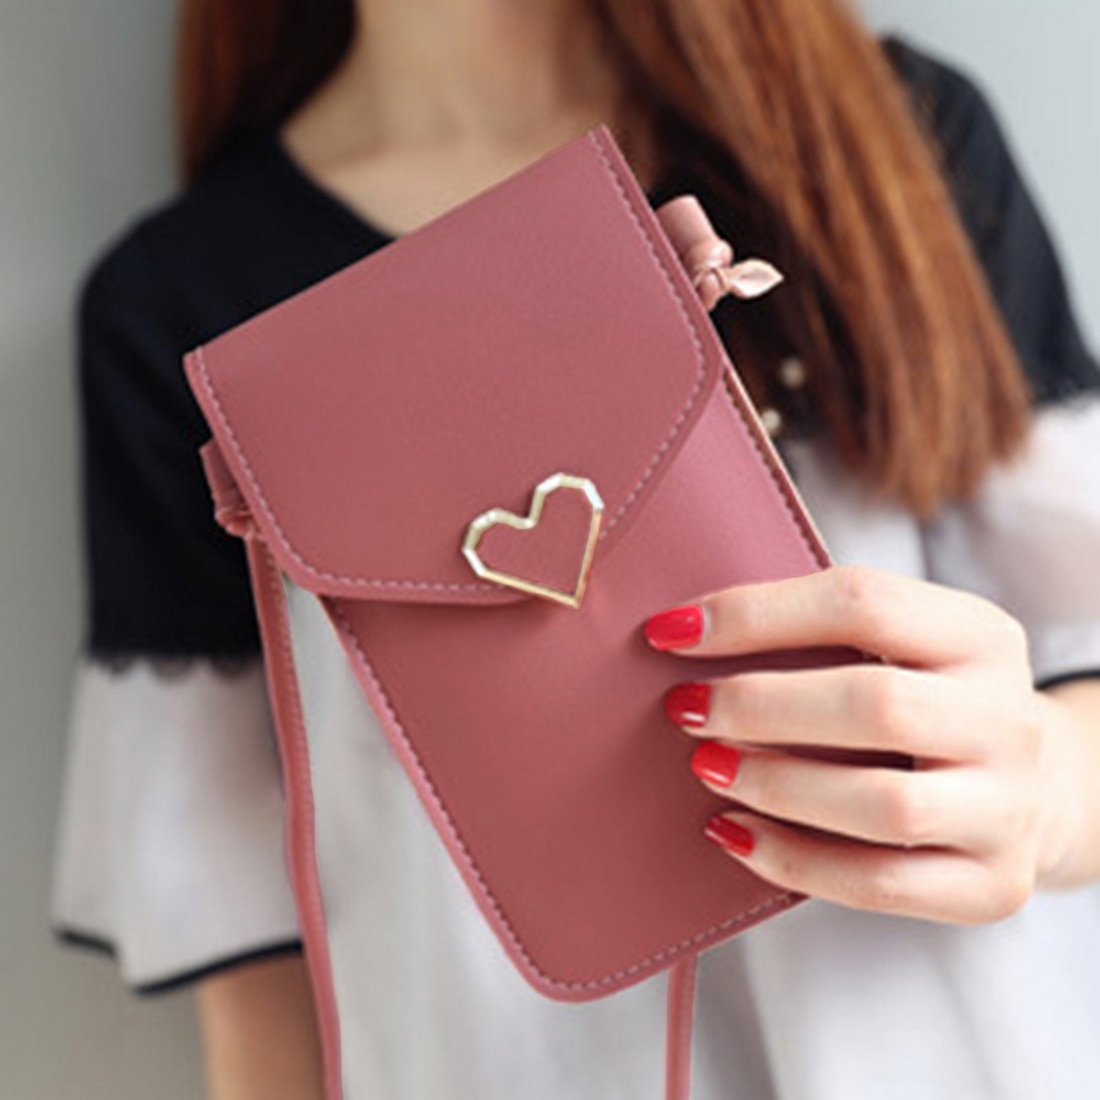 shop with crypto buy Women Phone Purse Simple Bag New Cross Wallets Smart phone Shoulder Light Handbags PU Leather Casual Solid Crossbody Bags pay with bitcoin